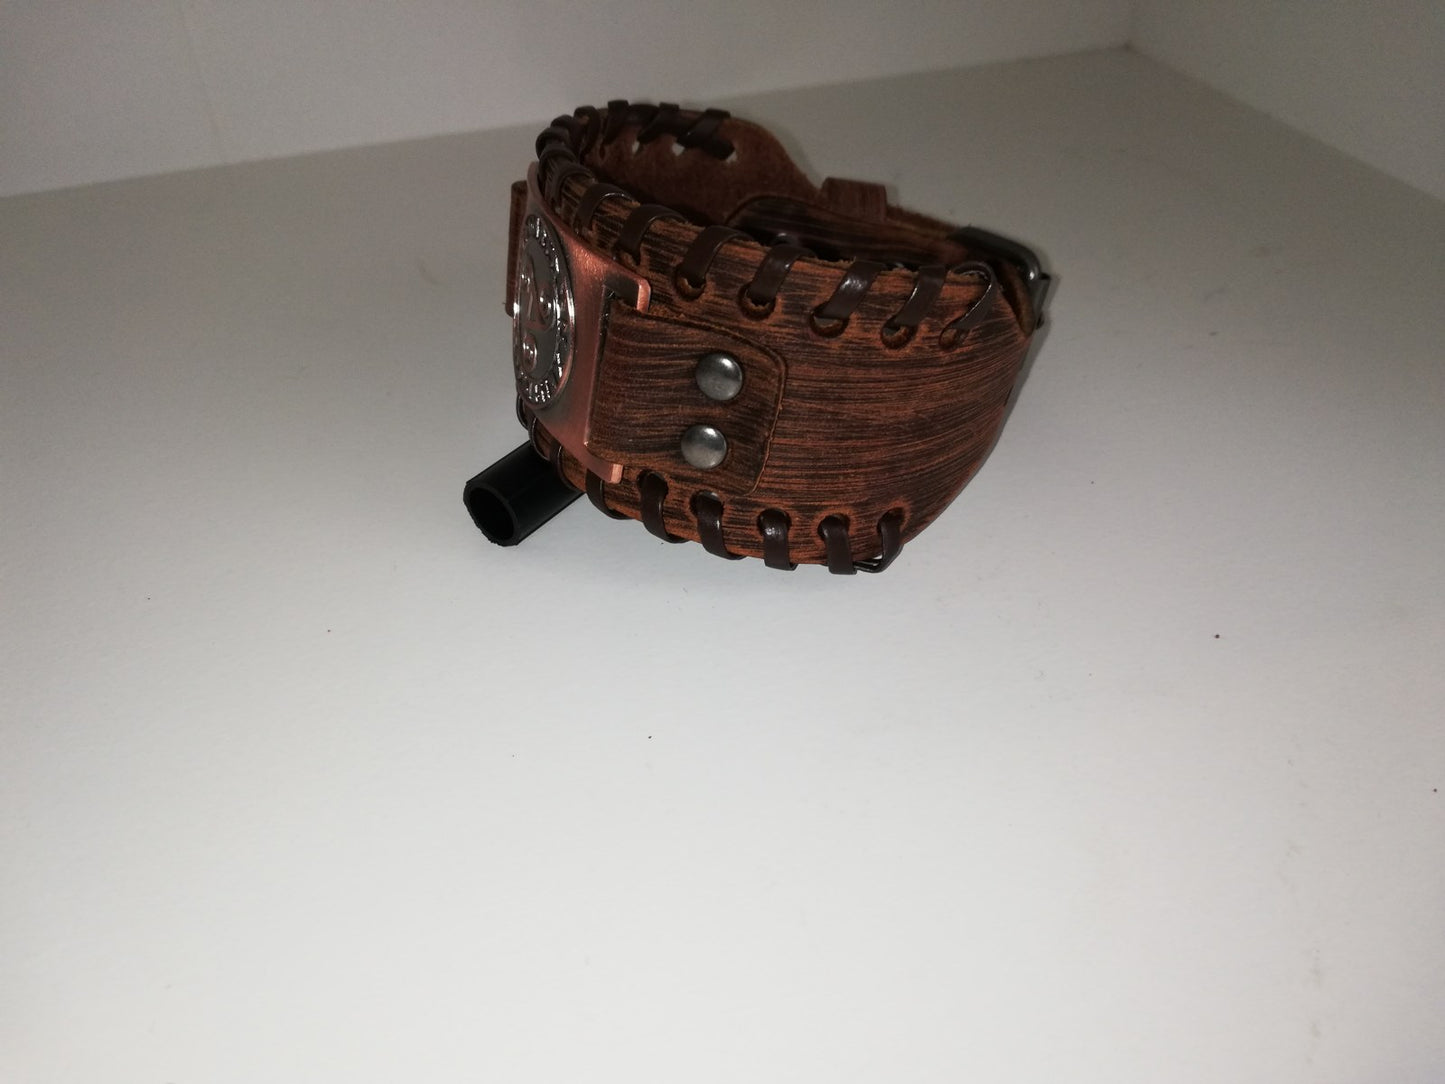 Brown leather bracelet with bronze colored BDSM logo